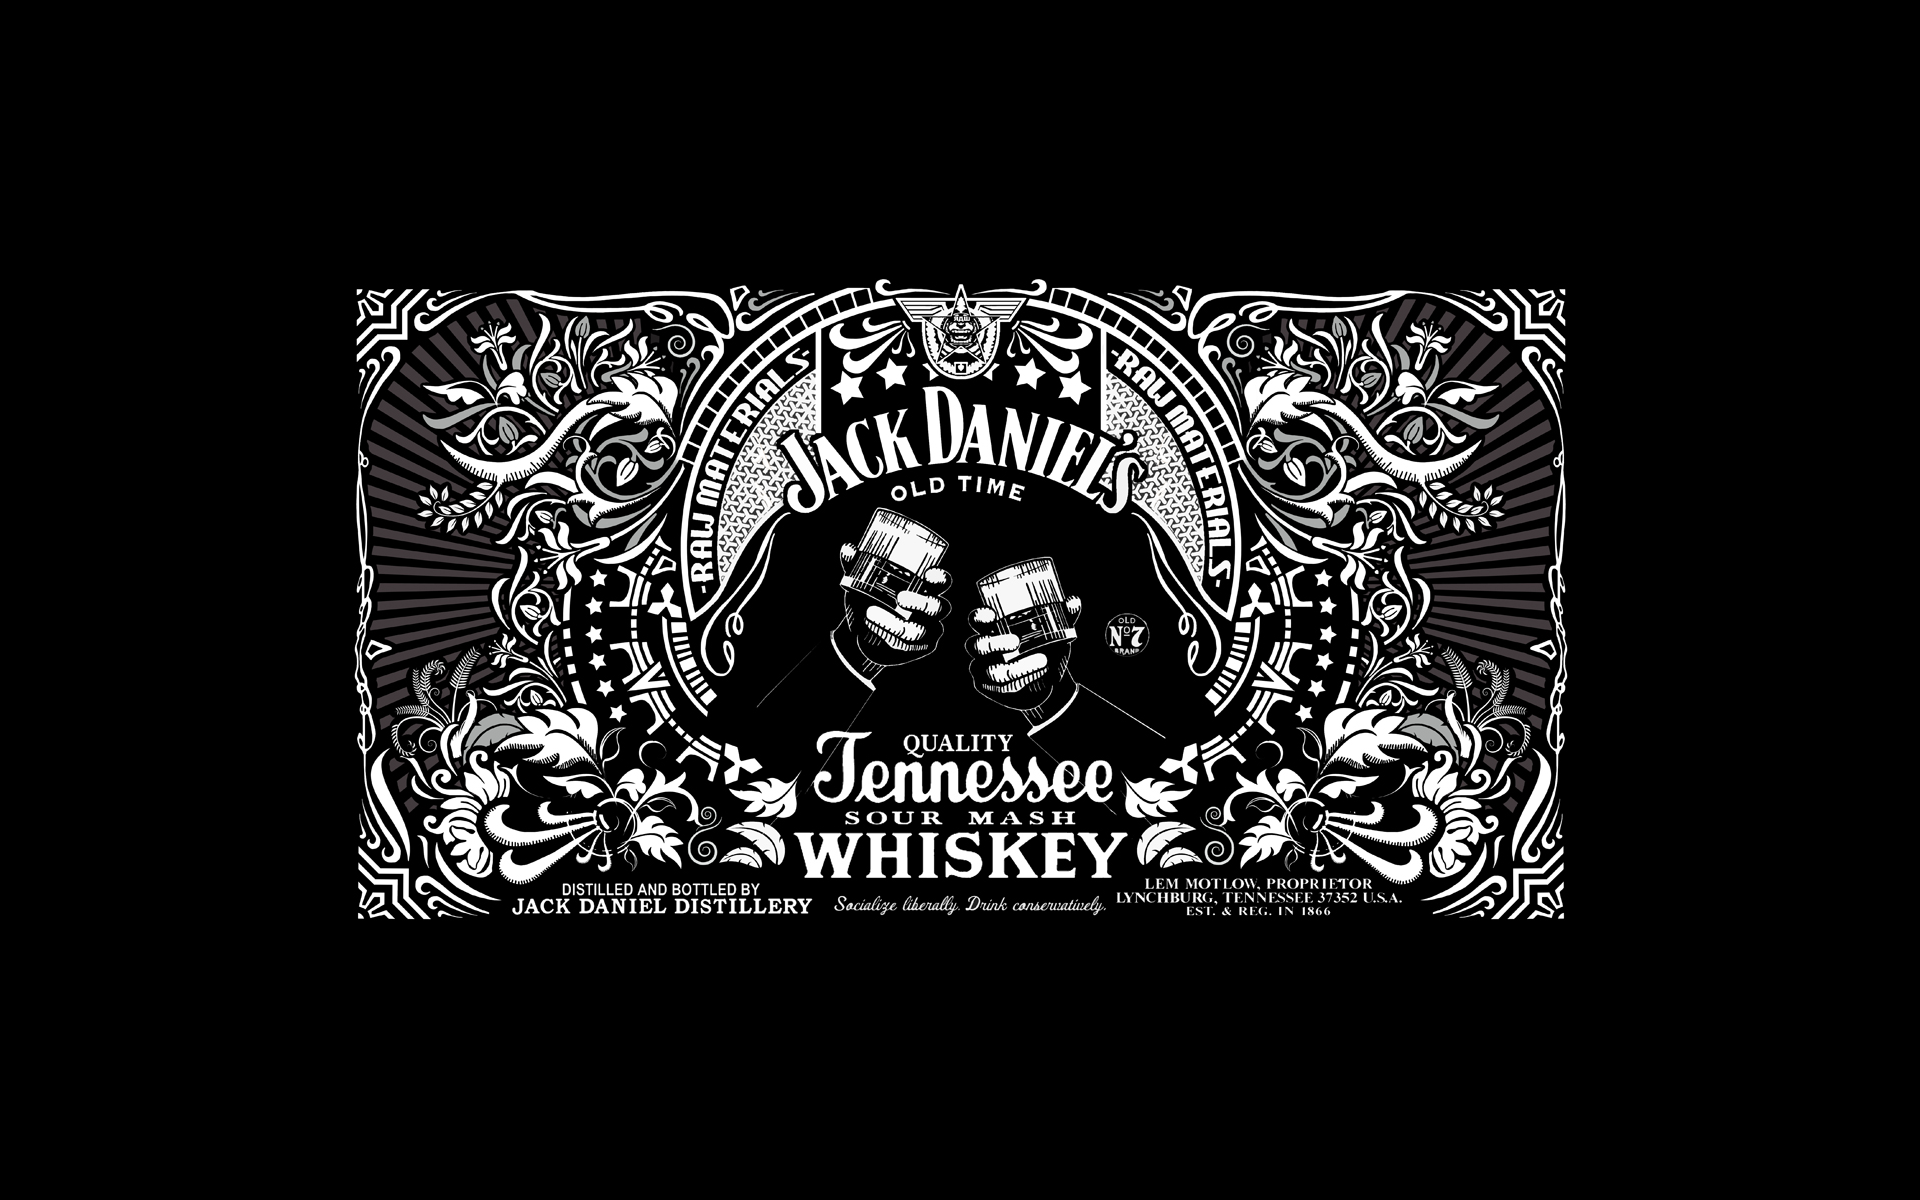 General 1920x1200 Jack Daniel's whiskey alcohol advertisements simple background black background